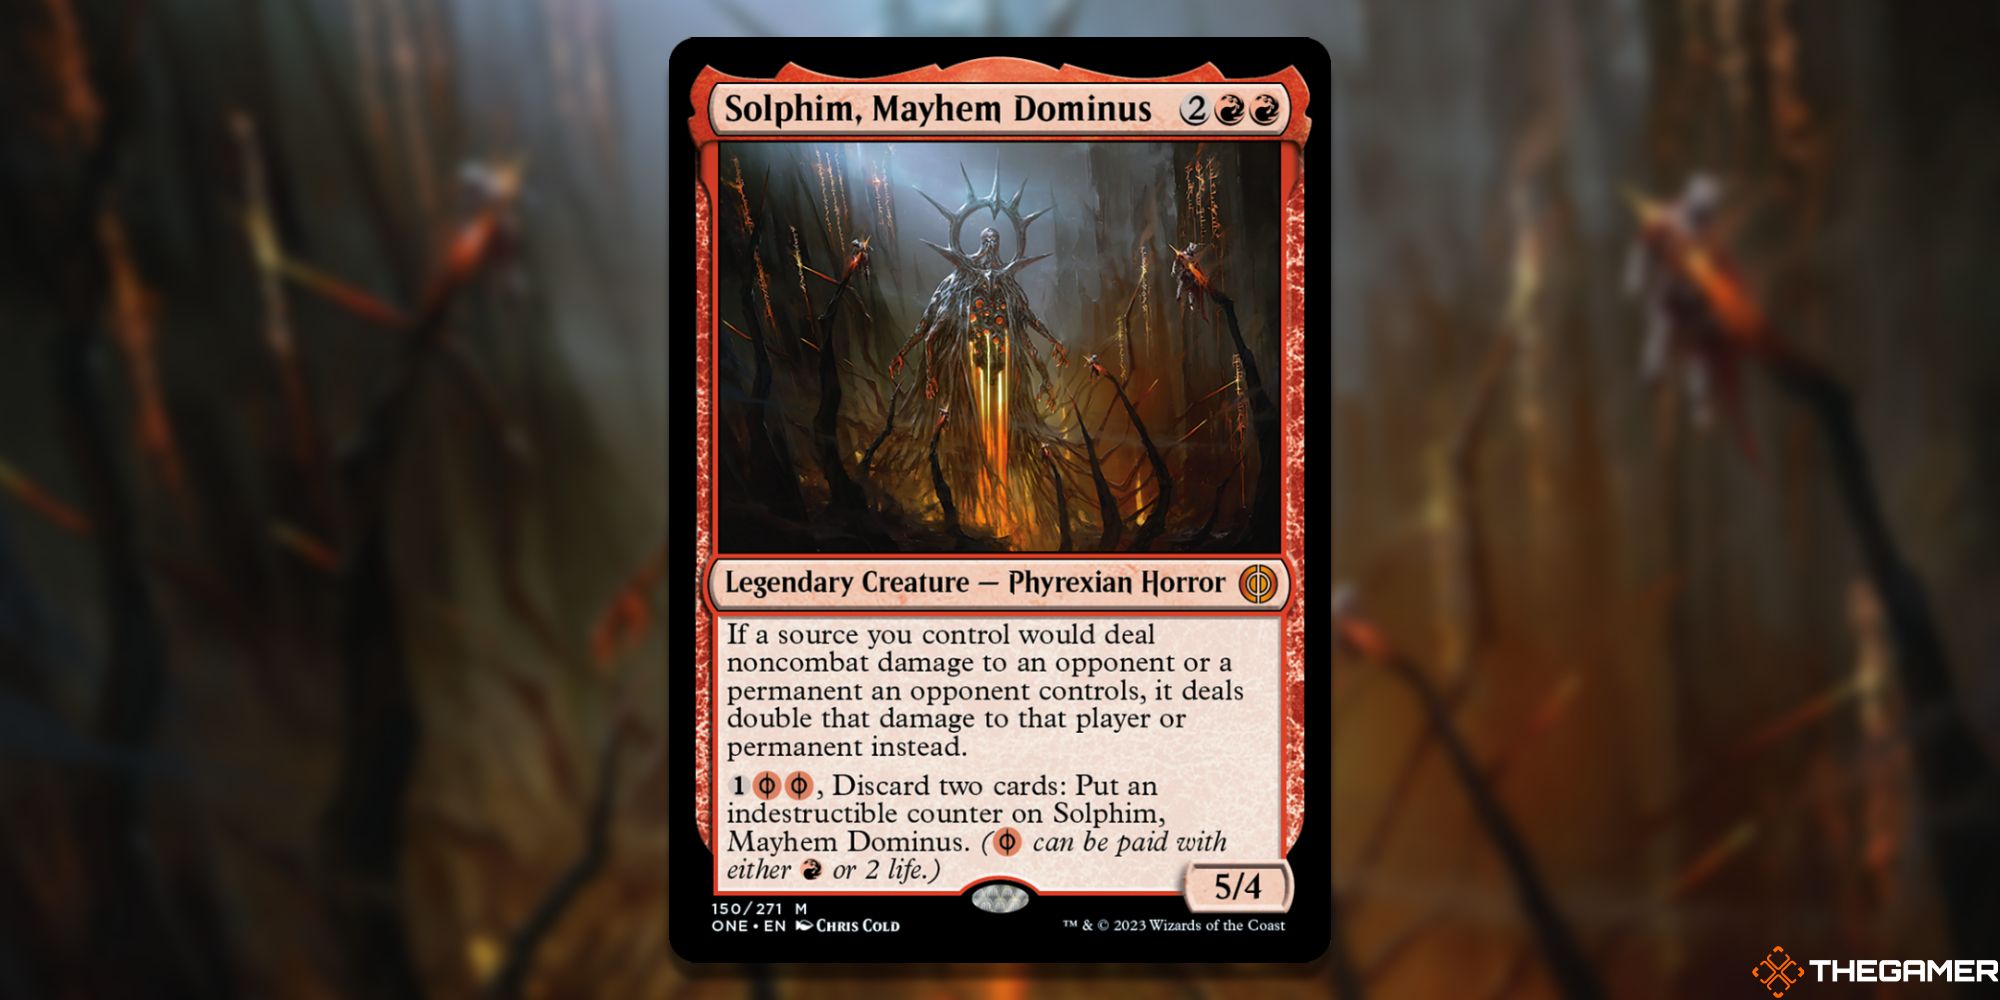 Image of the Solphim Mayhem Dominus card in Magic: The Gathering, with art by Chris Cold